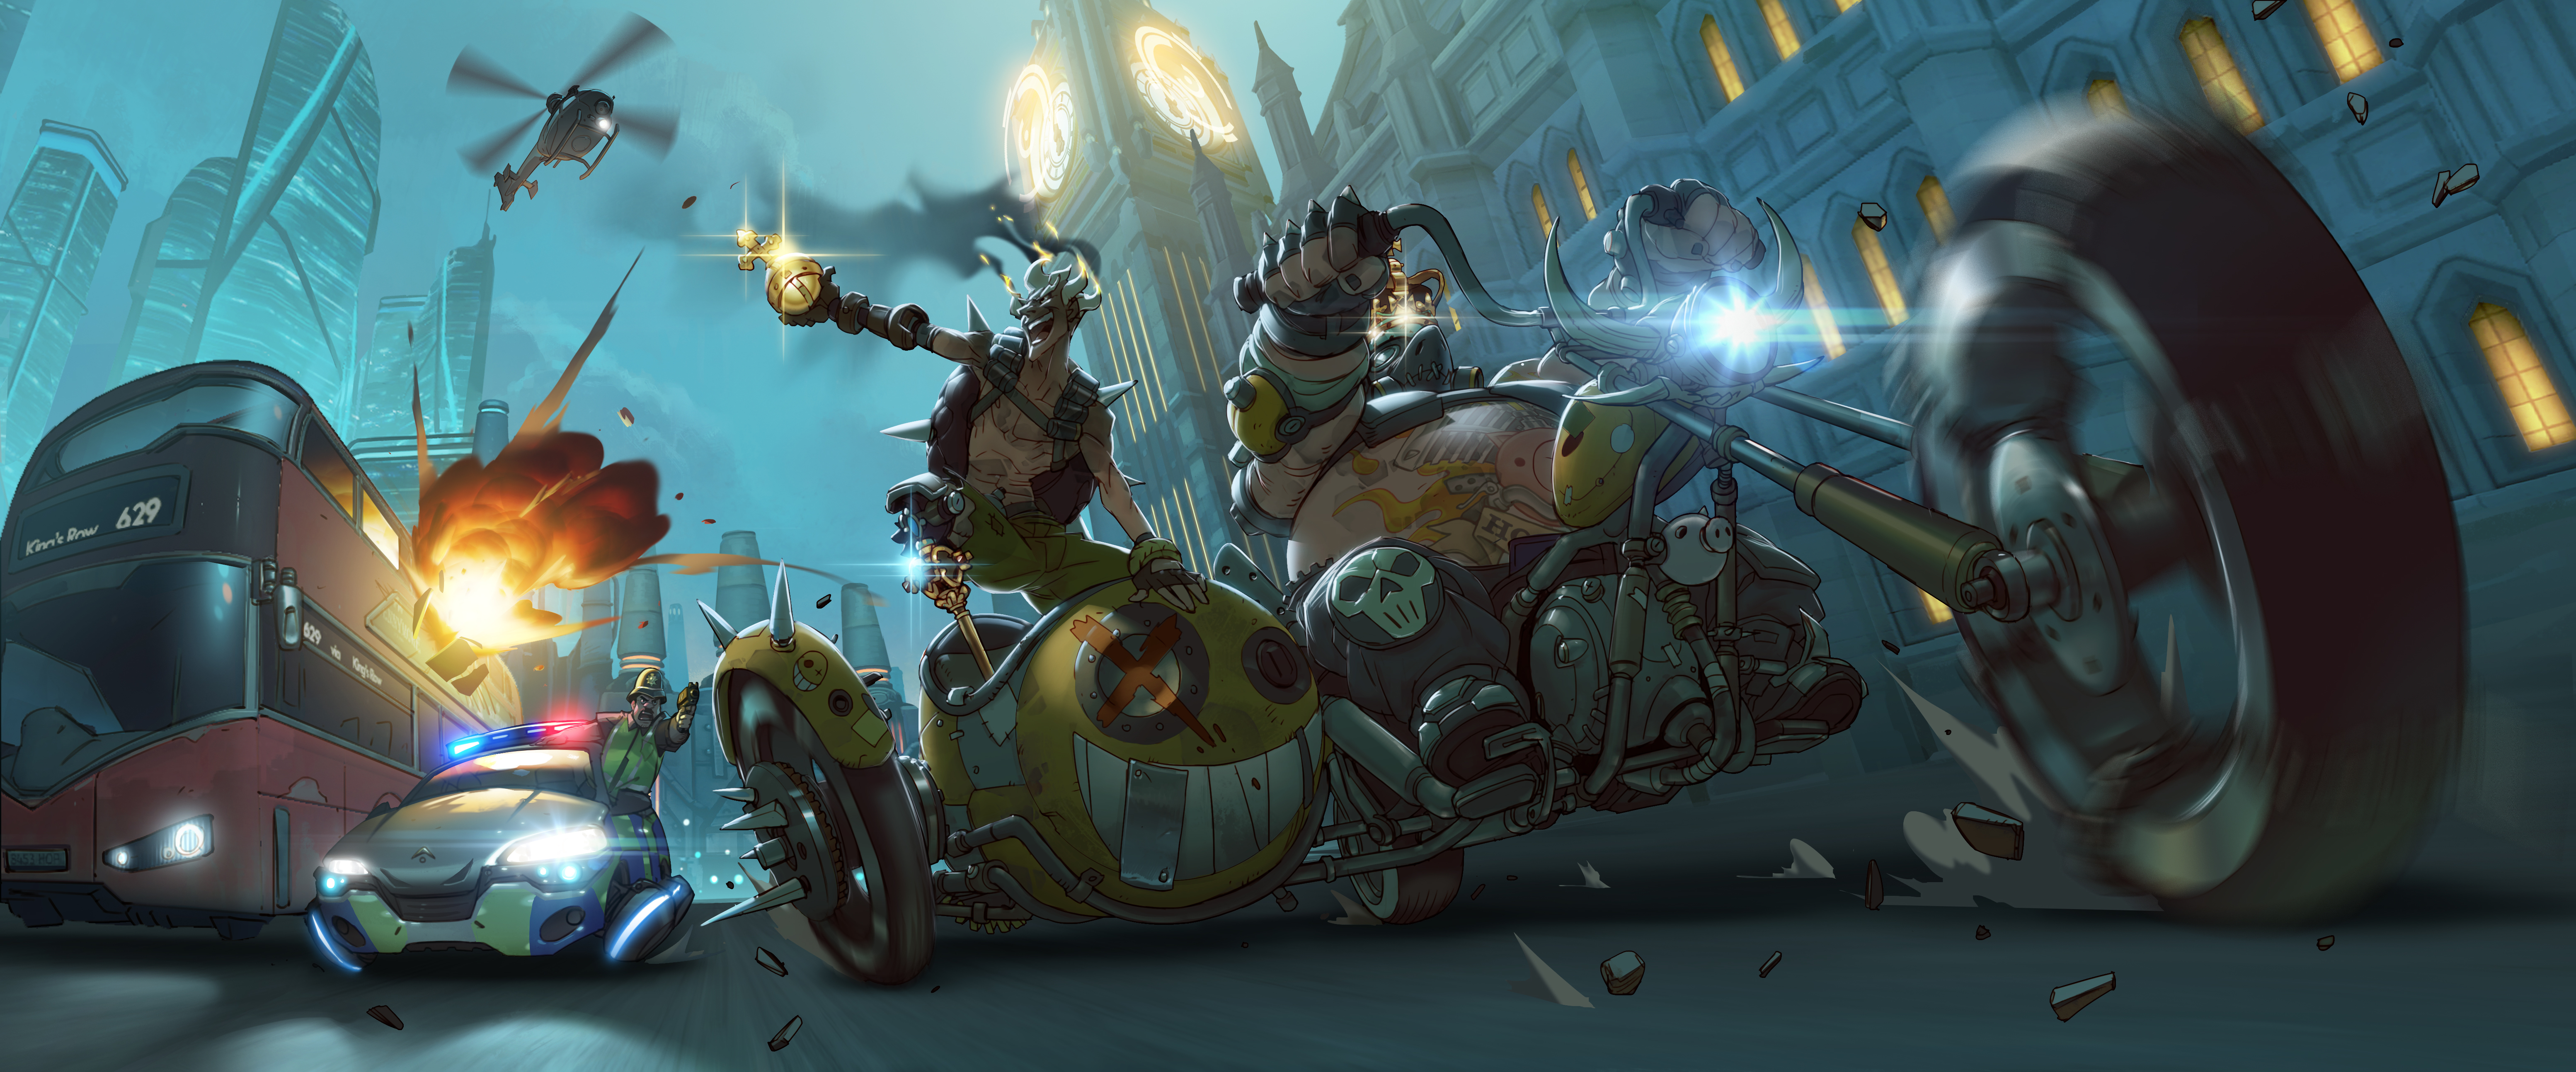 Wallpaper overwatch chase police road bike motorcycle criminals